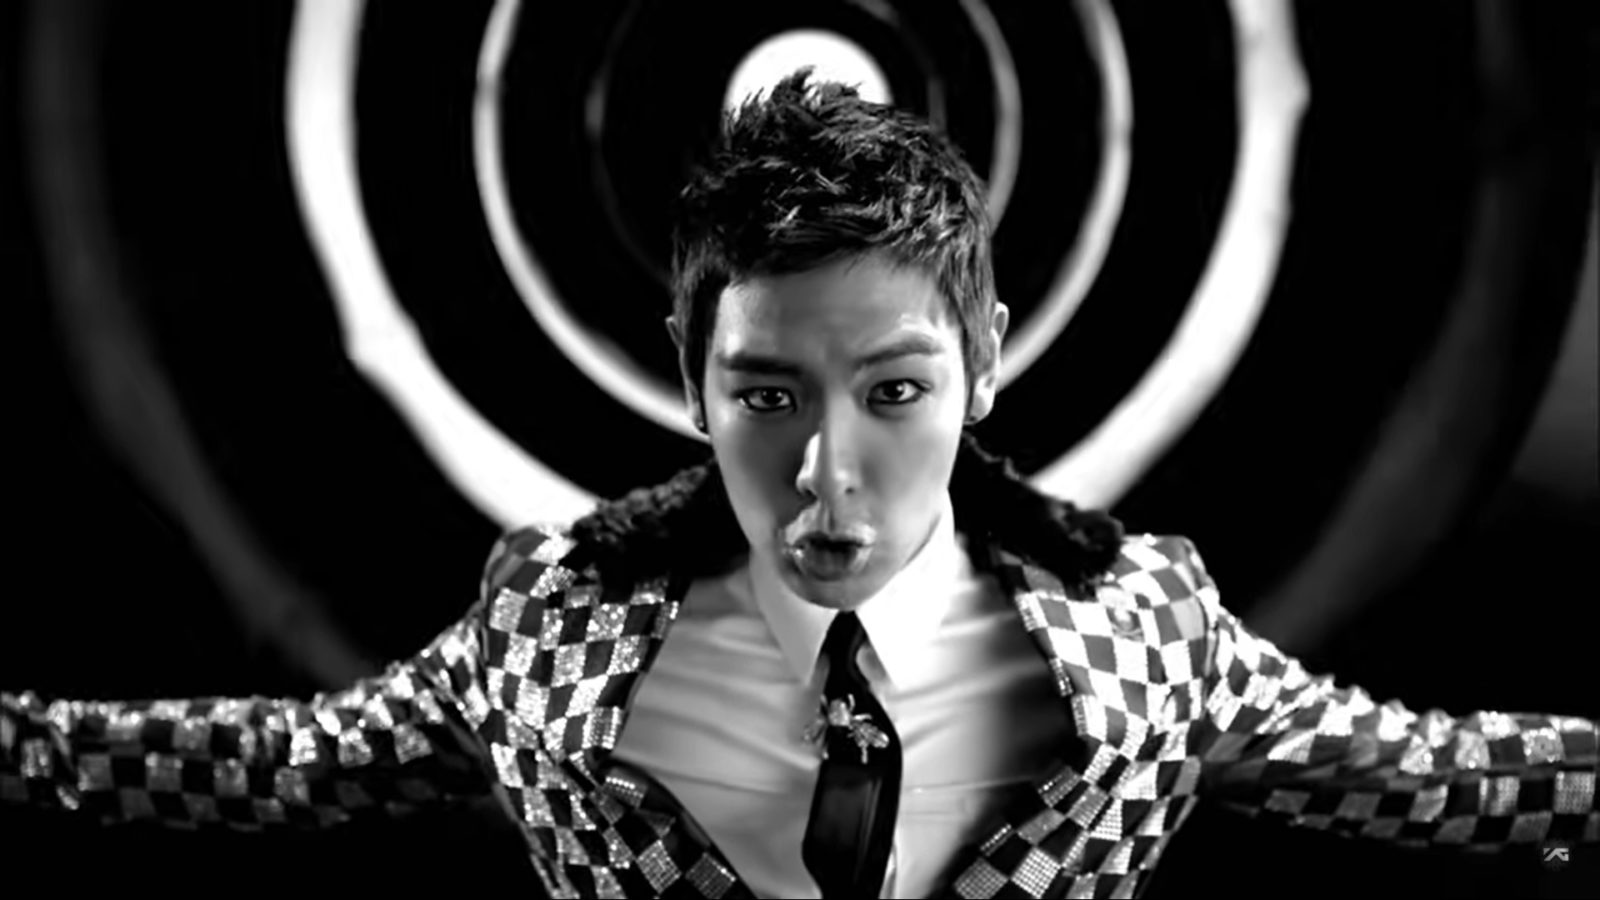 BIGBANG’s T.O.P writes an emotional letter for fans after ‘Still Life’ release